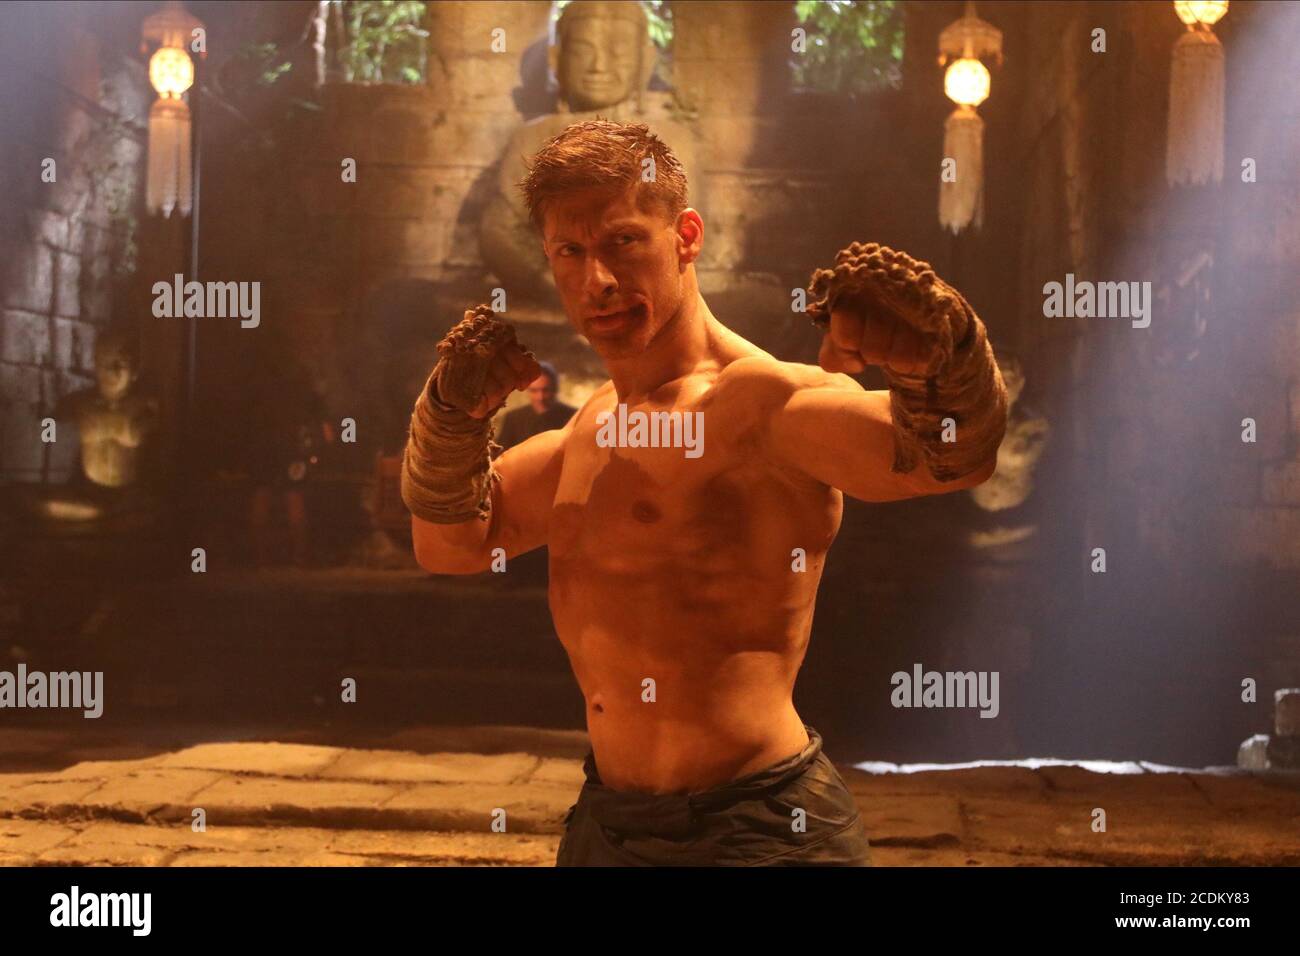 Kickboxer Film High Resolution Stock Photography and Images - Alamy